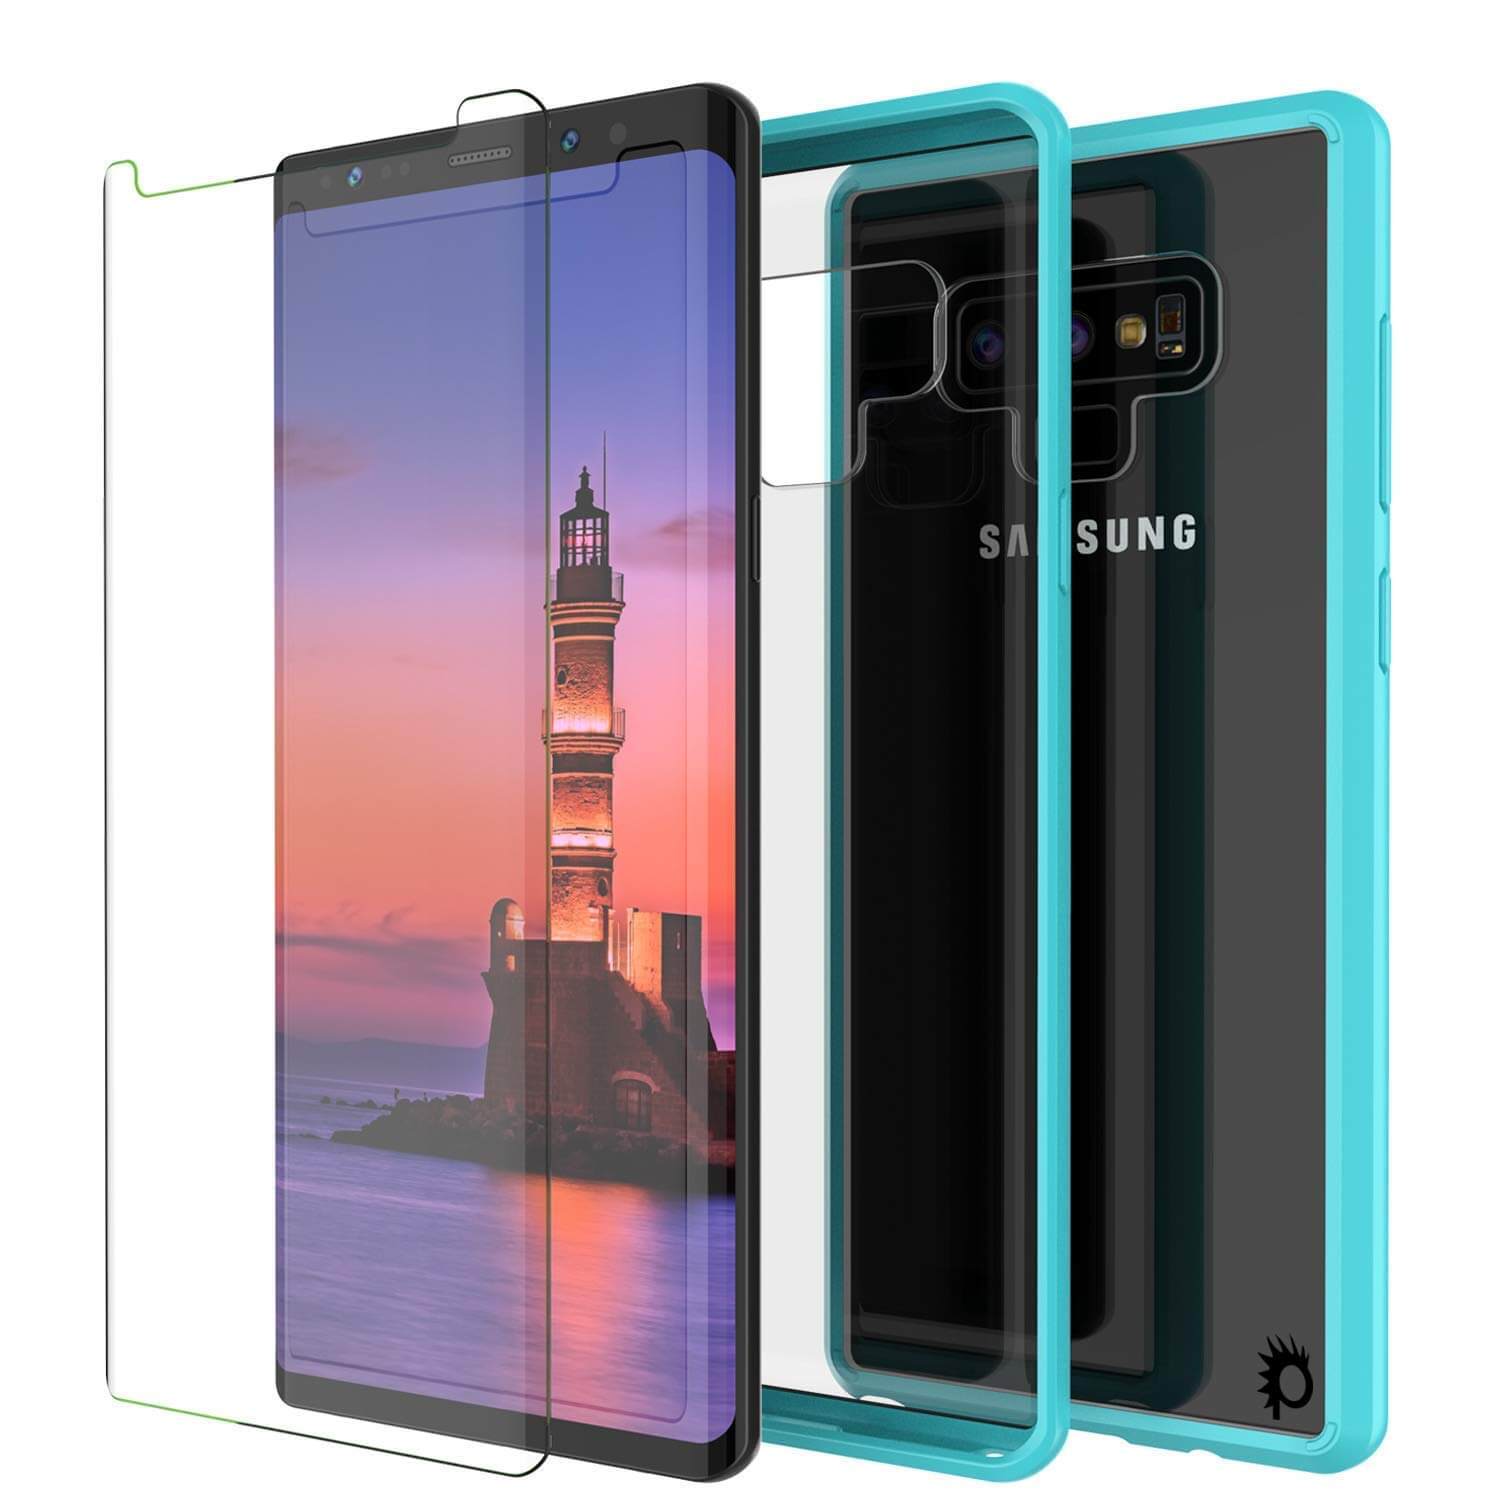 Galaxy Note 9 Case, PUNKcase [LUCID 2.0 Series] [Slim Fit] Armor Cover W/Integrated Anti-Shock System [Teal] - PunkCase NZ